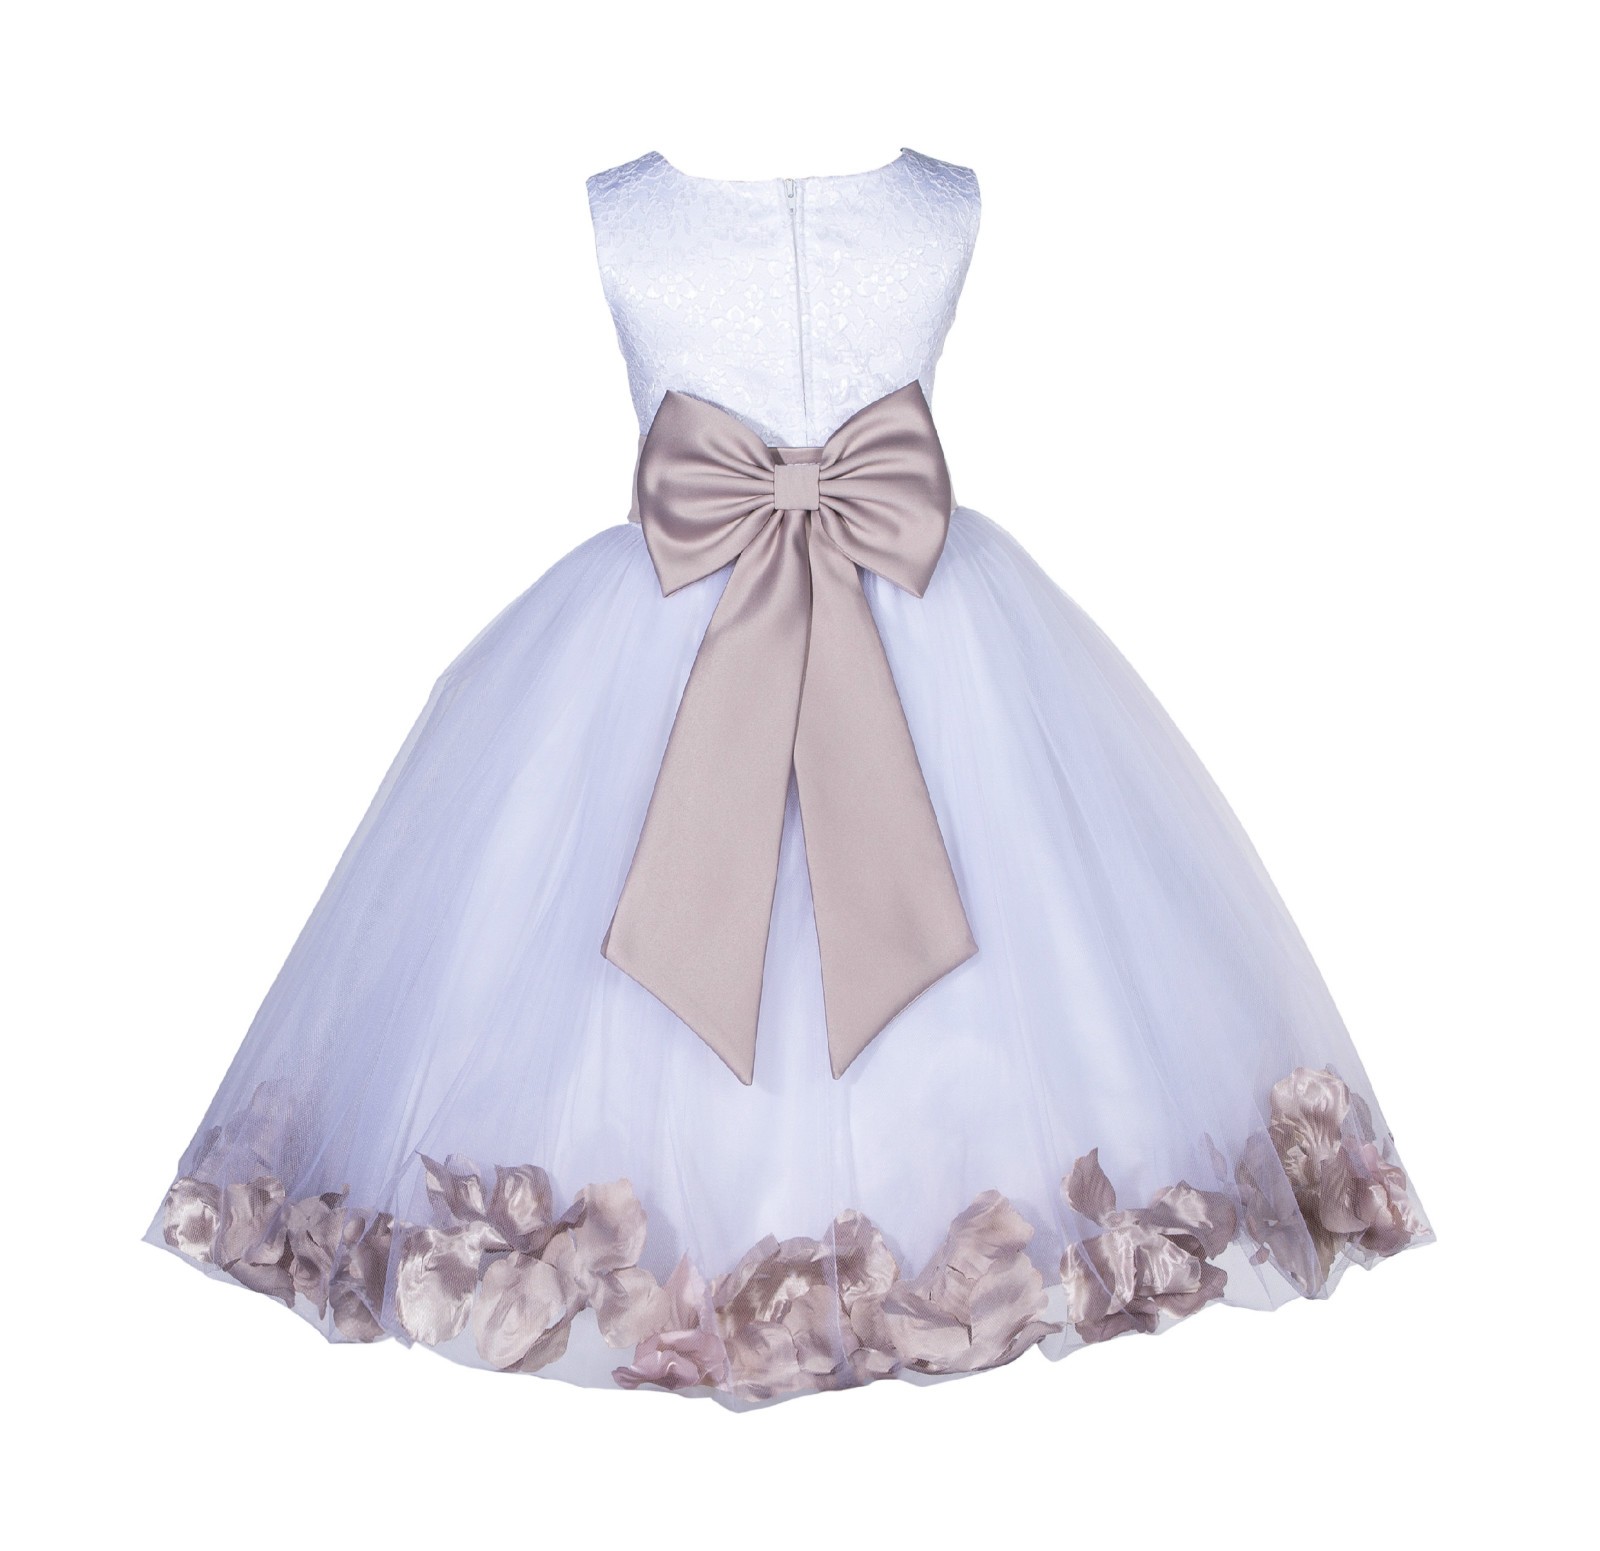 White/Biscotti Lace Top Tulle Floral Petals Flower Girl Dress 165T